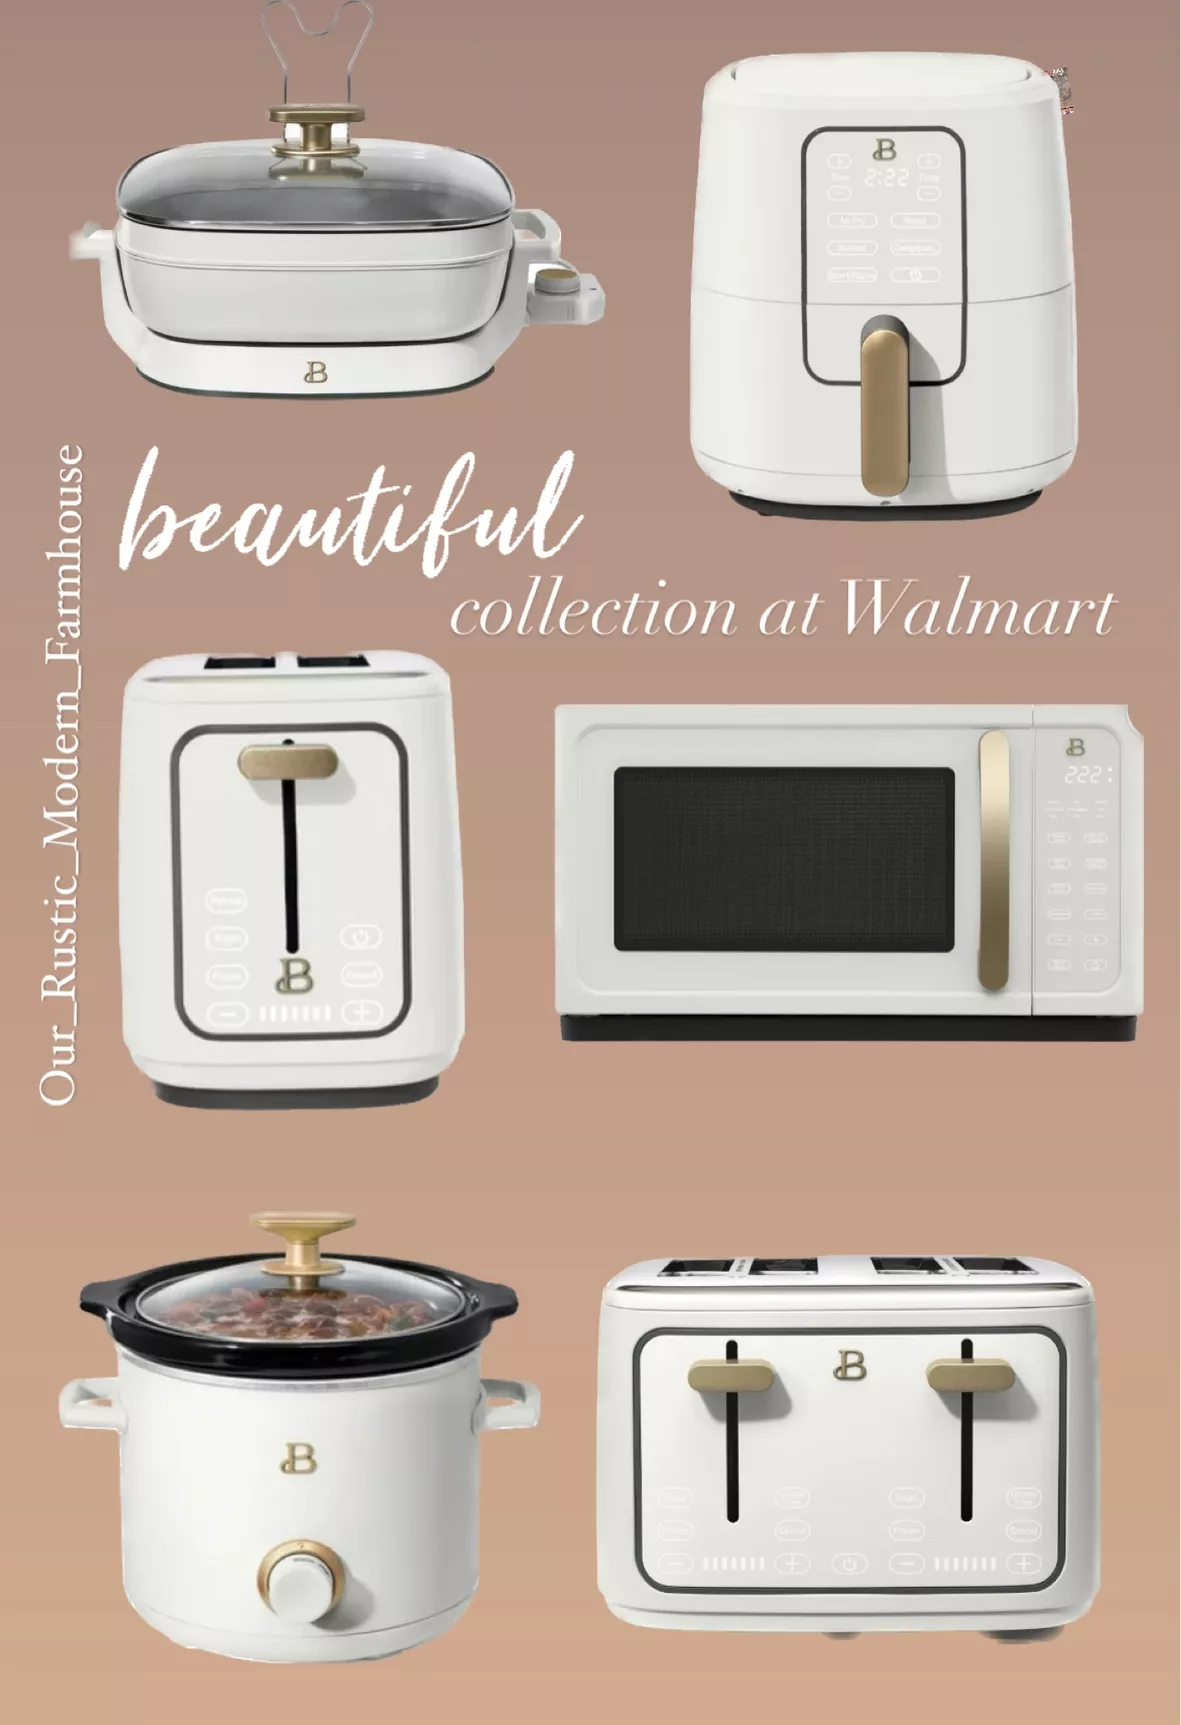 Beautiful 4-Slice Toaster with Touch-Activated Display, White Icing by Drew  Barrymore